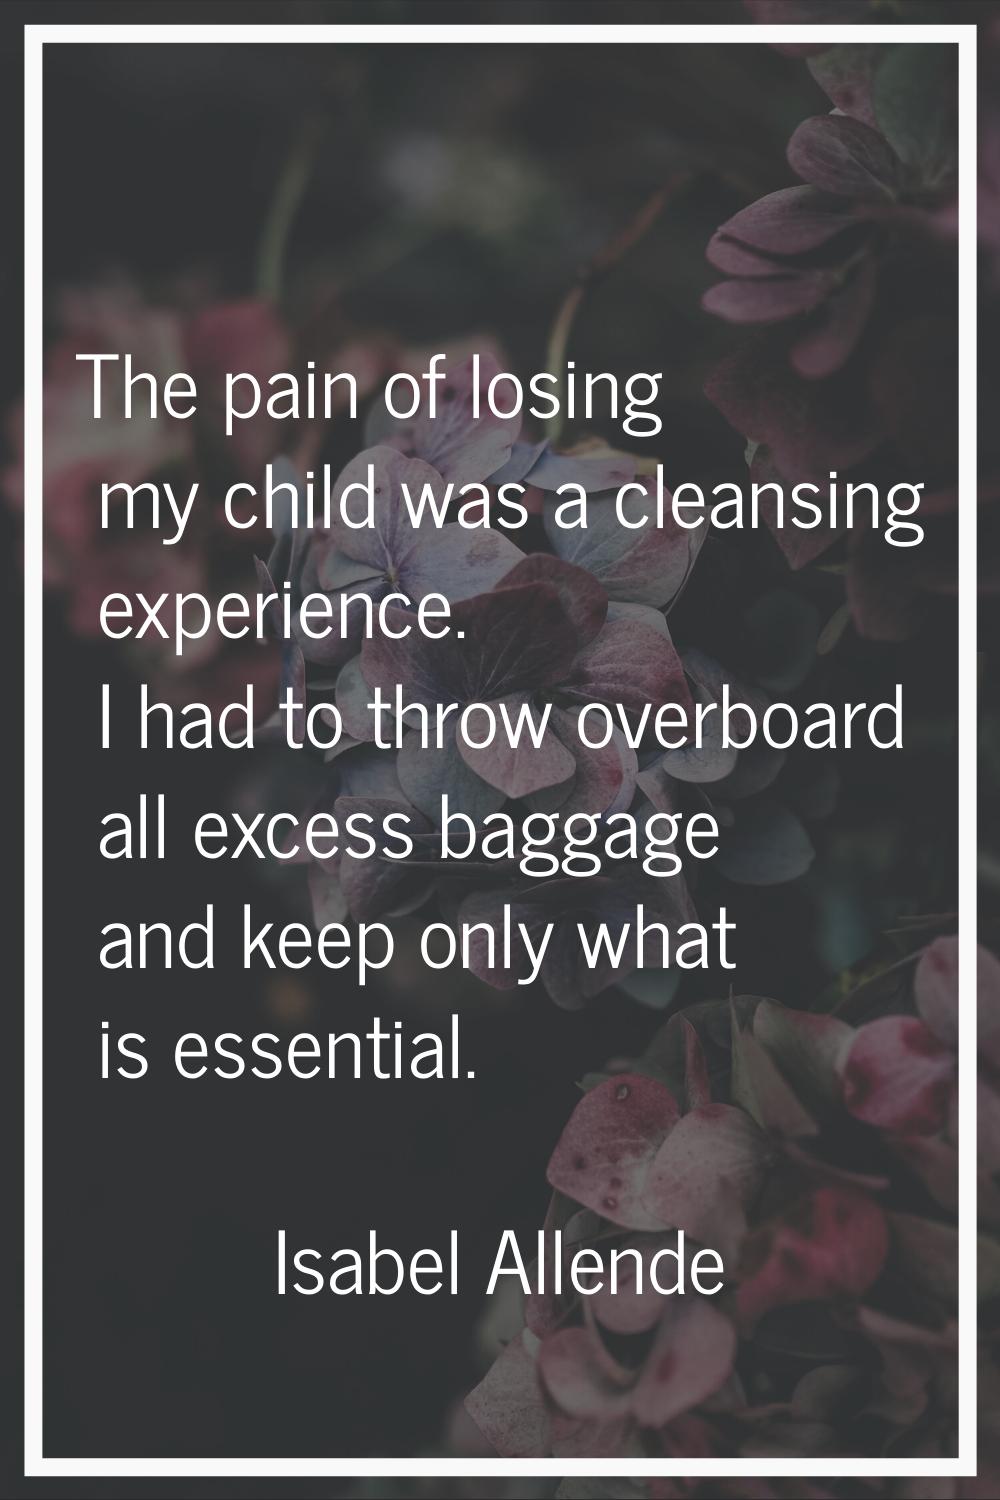 The pain of losing my child was a cleansing experience. I had to throw overboard all excess baggage